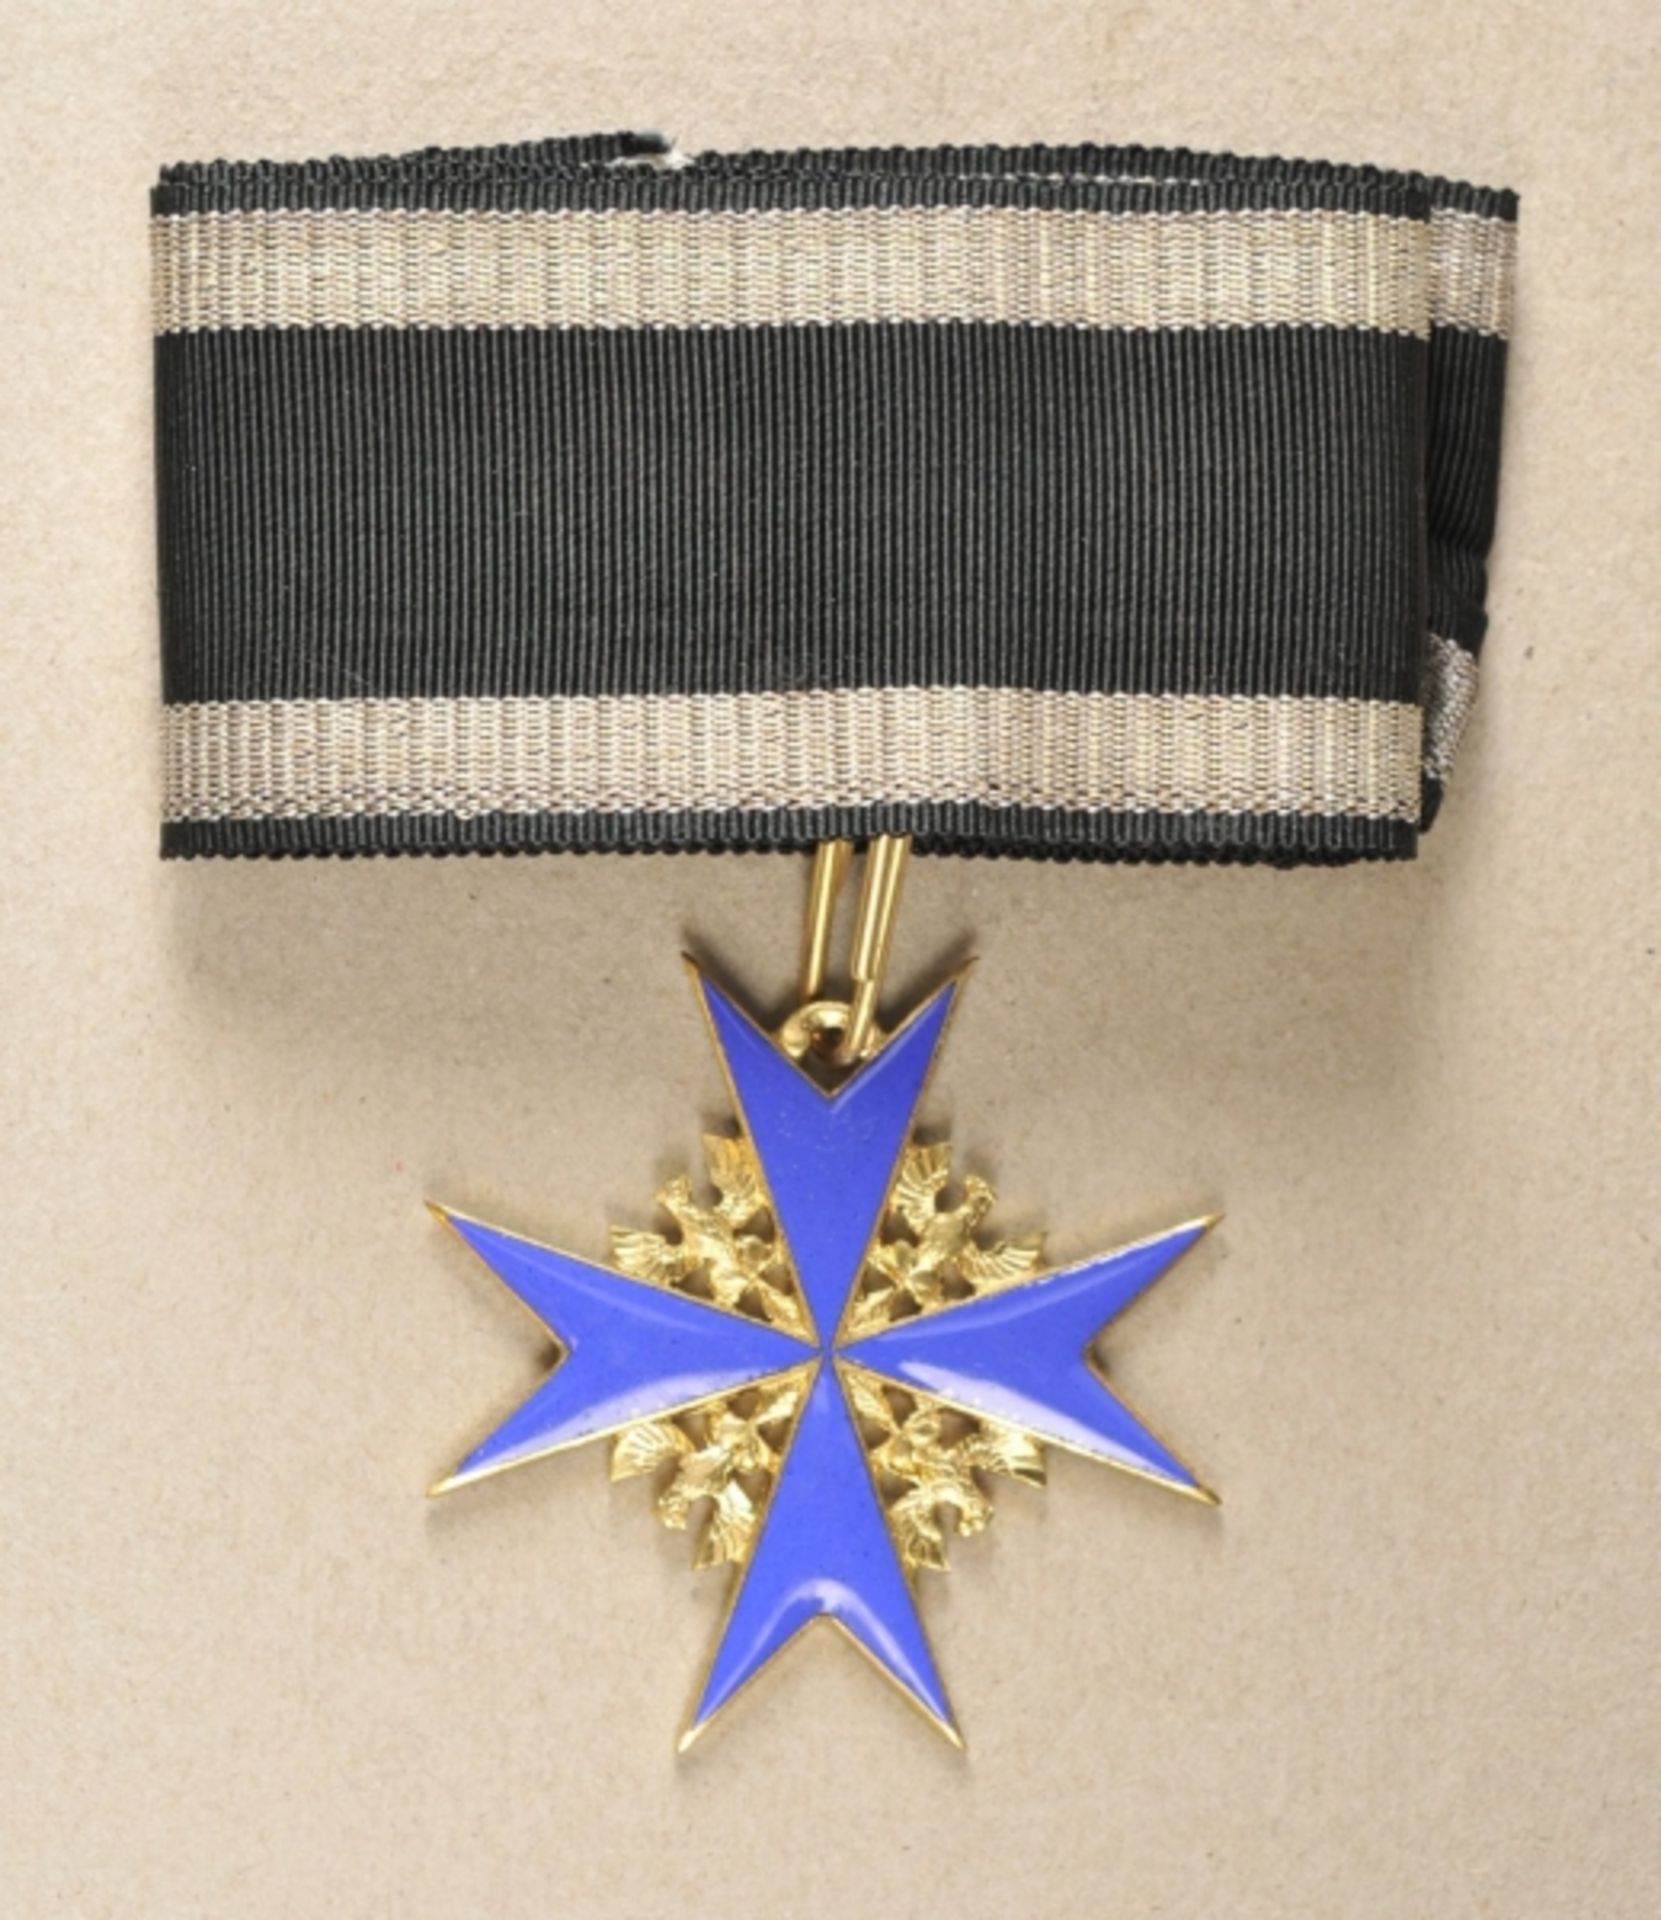 Prussia: Collerctors manifacture of the order Puor le mérite. Non-ferrous metal gilded and enameled, - Image 3 of 3